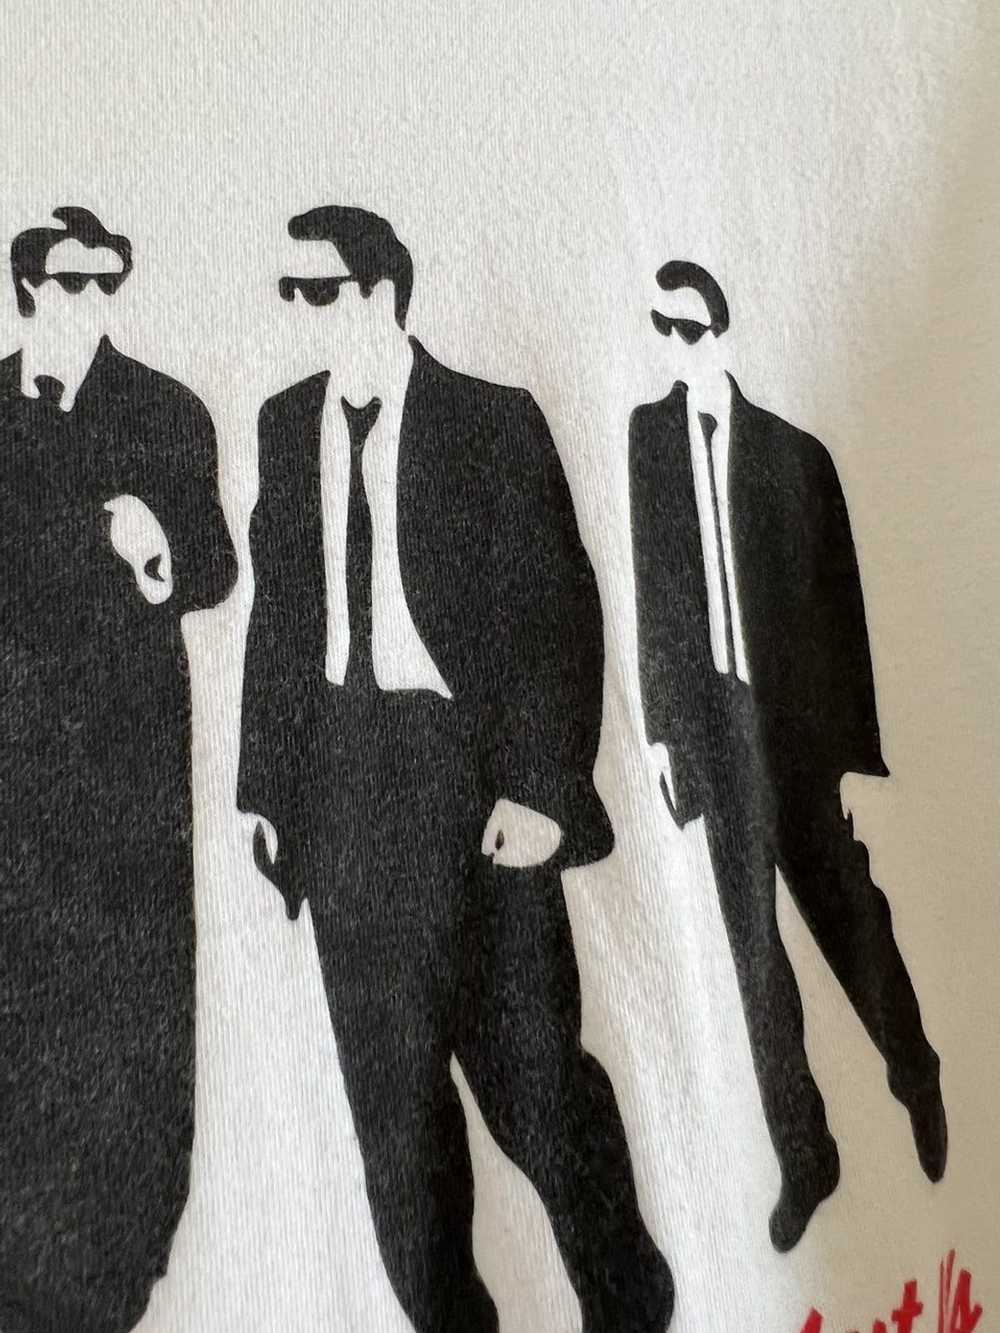 Kith Kith just us reservoir dogs t shirt size m - image 4